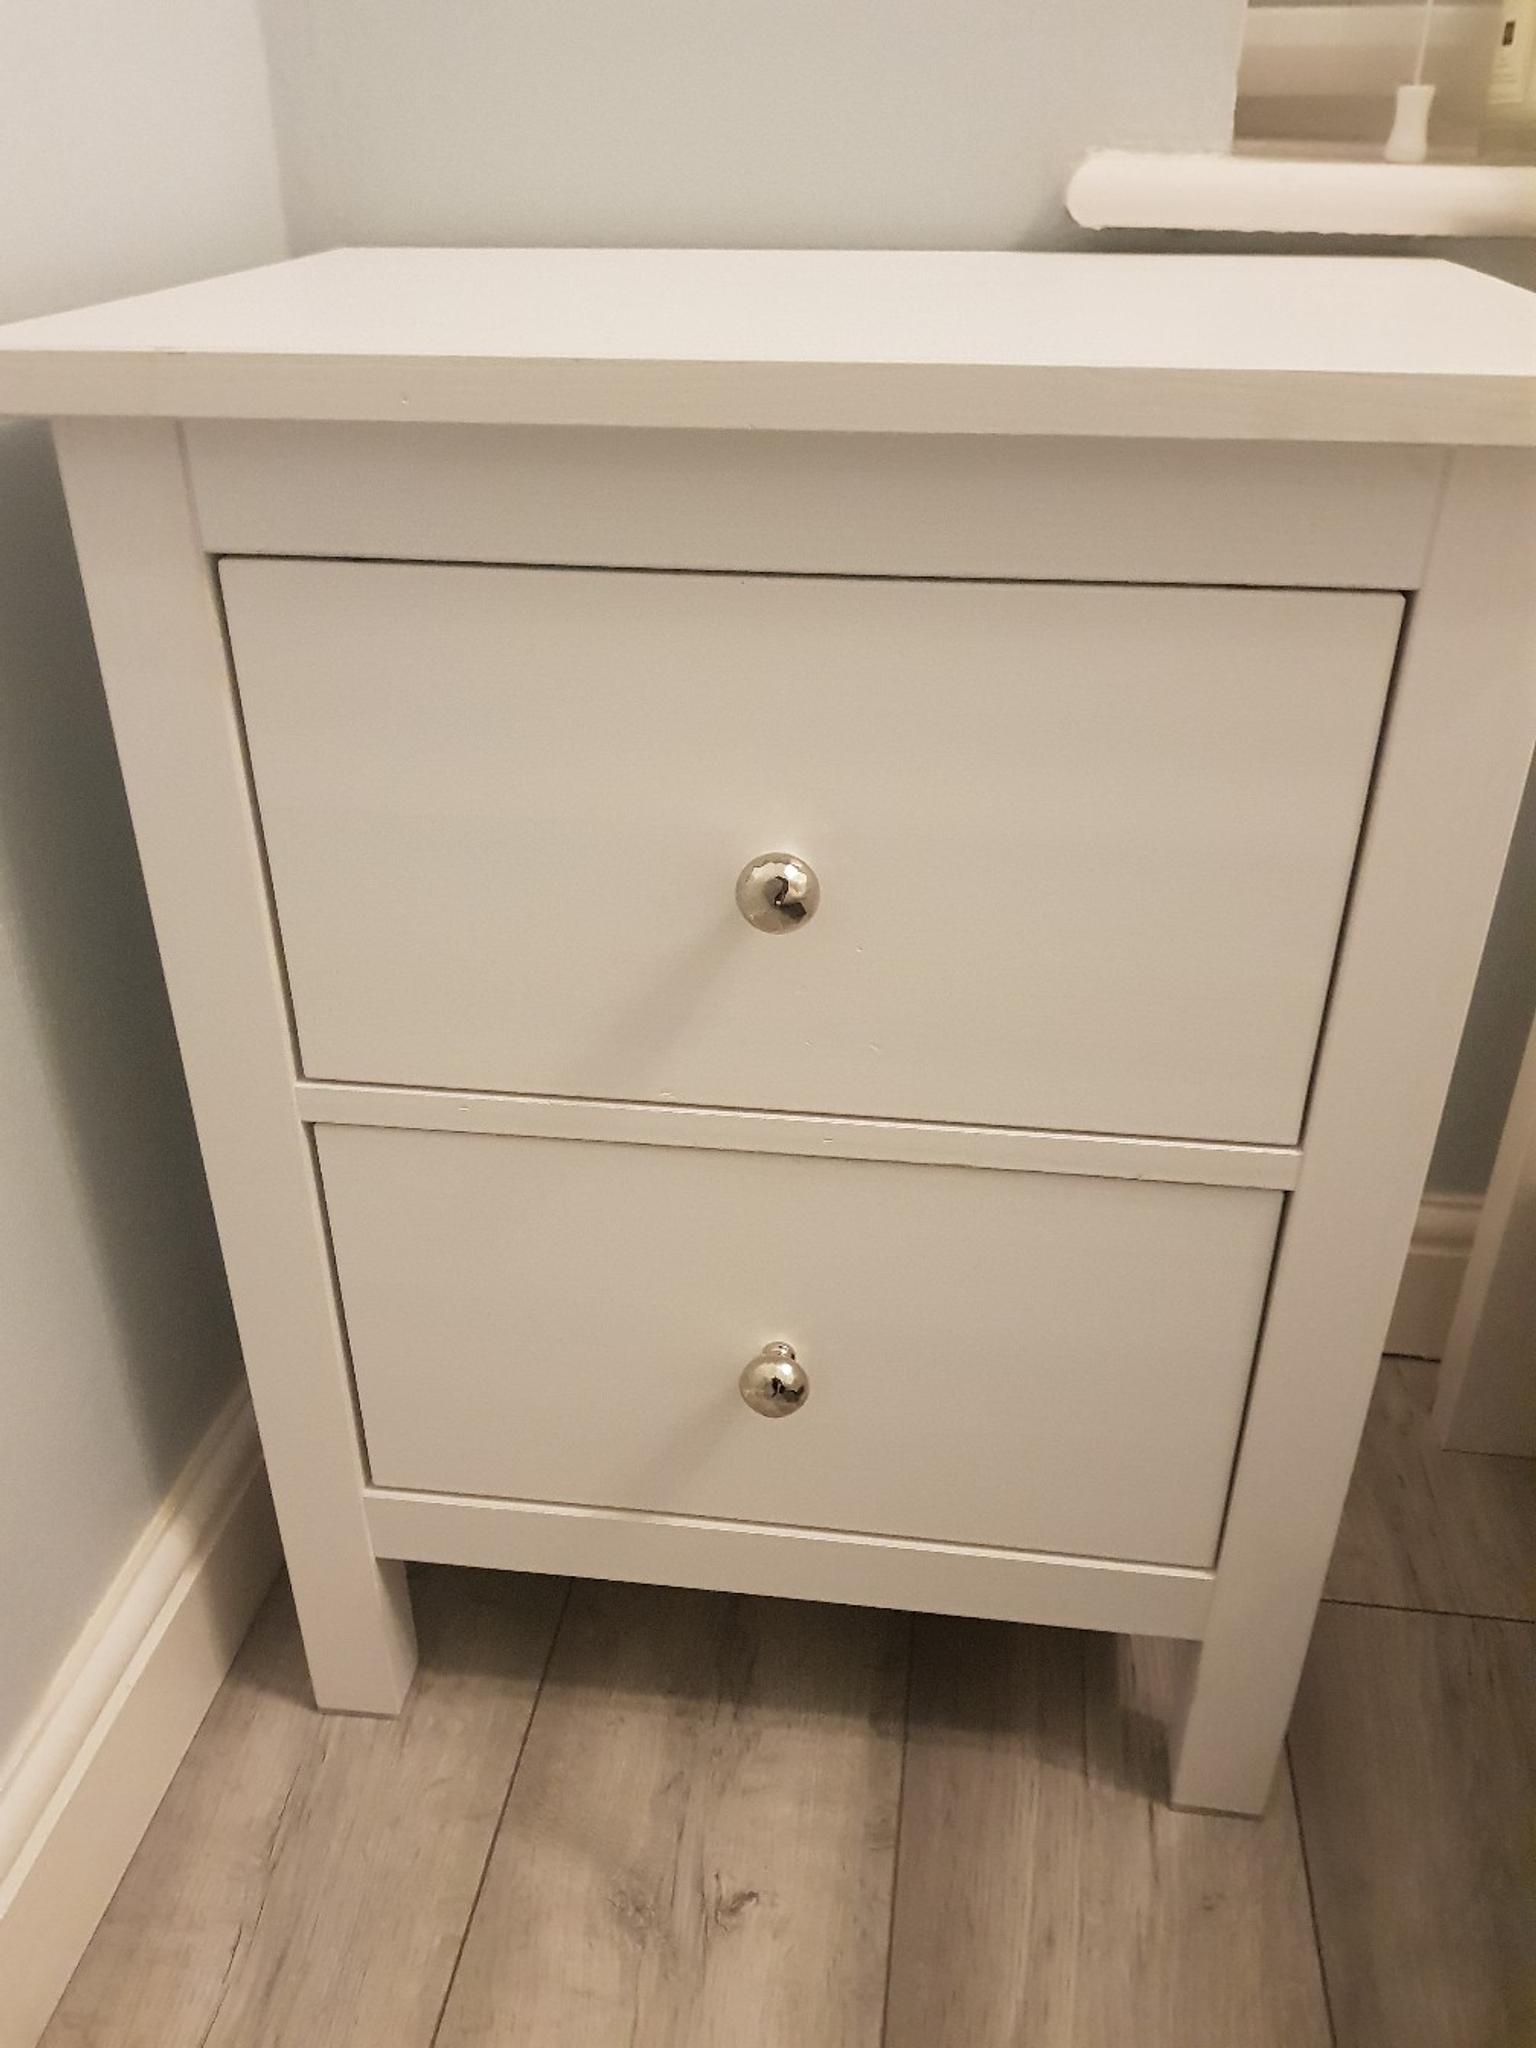 Ikea Hemnes Chest Of 2 Drawers 54x66 Cm In De24 Derby For